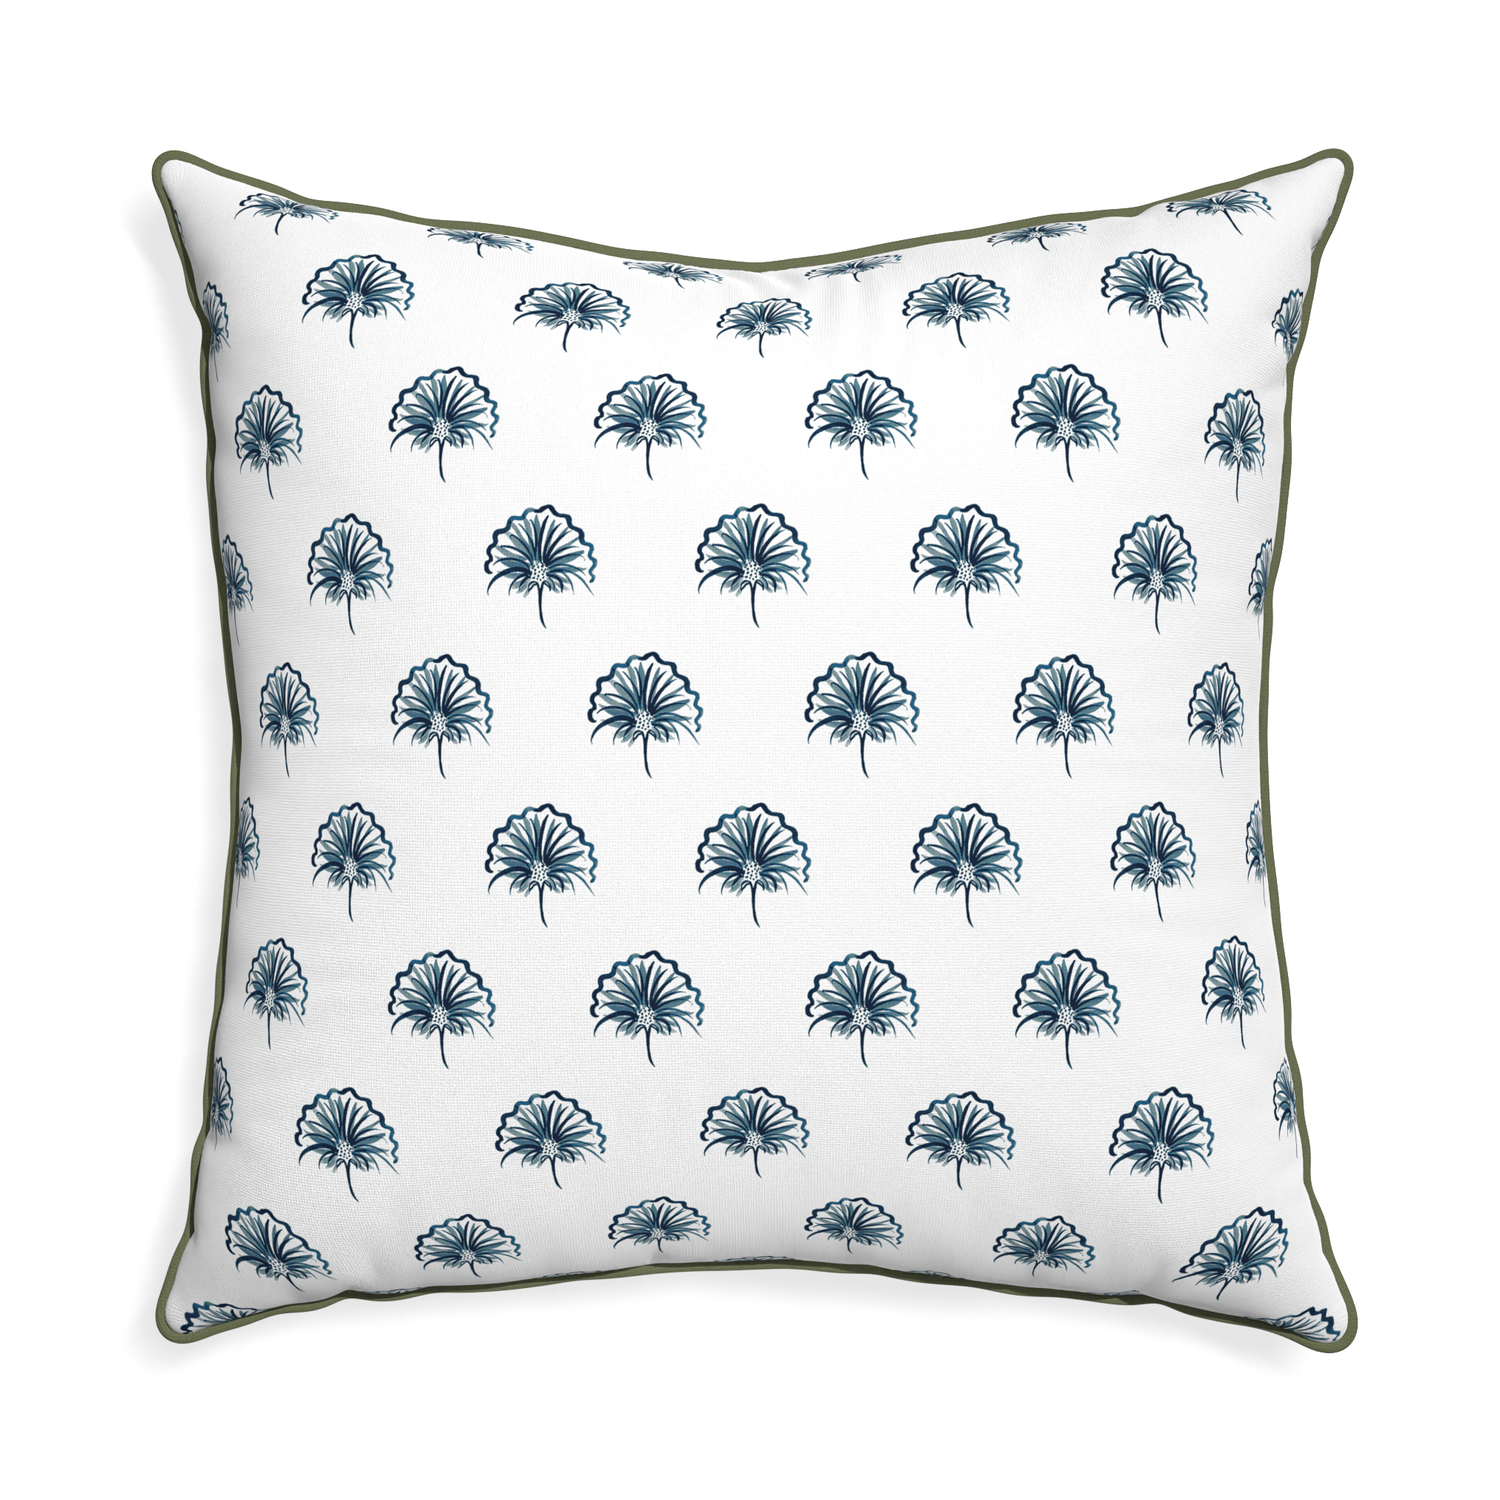 Euro-sham penelope midnight custom pillow with f piping on white background